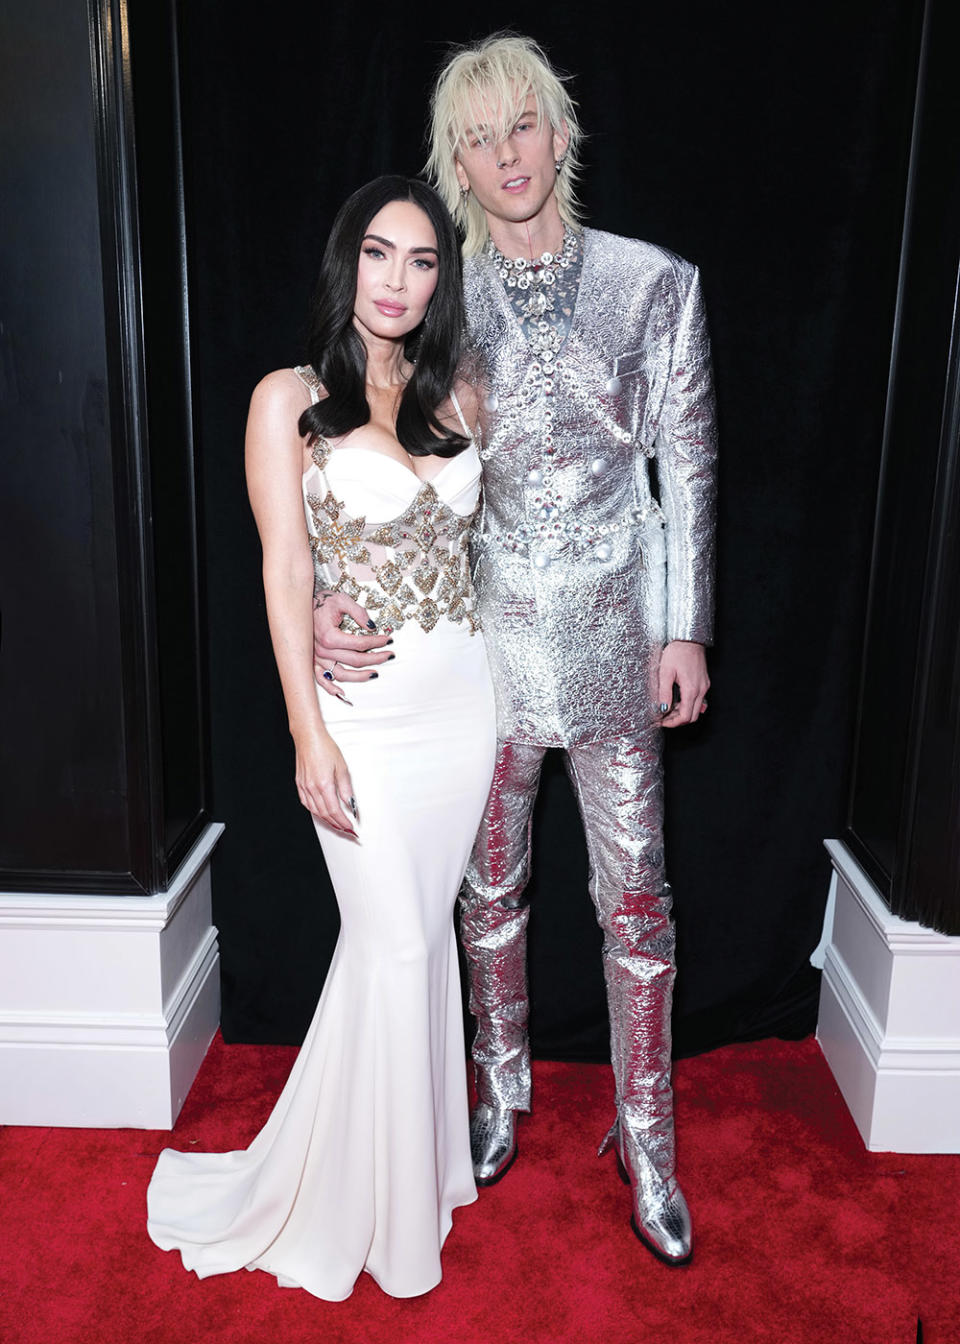 At the Grammys, nominee Machine Gun Kelly shone in silver foil, while Megan Fox kept it more “simple,” said her stylist.